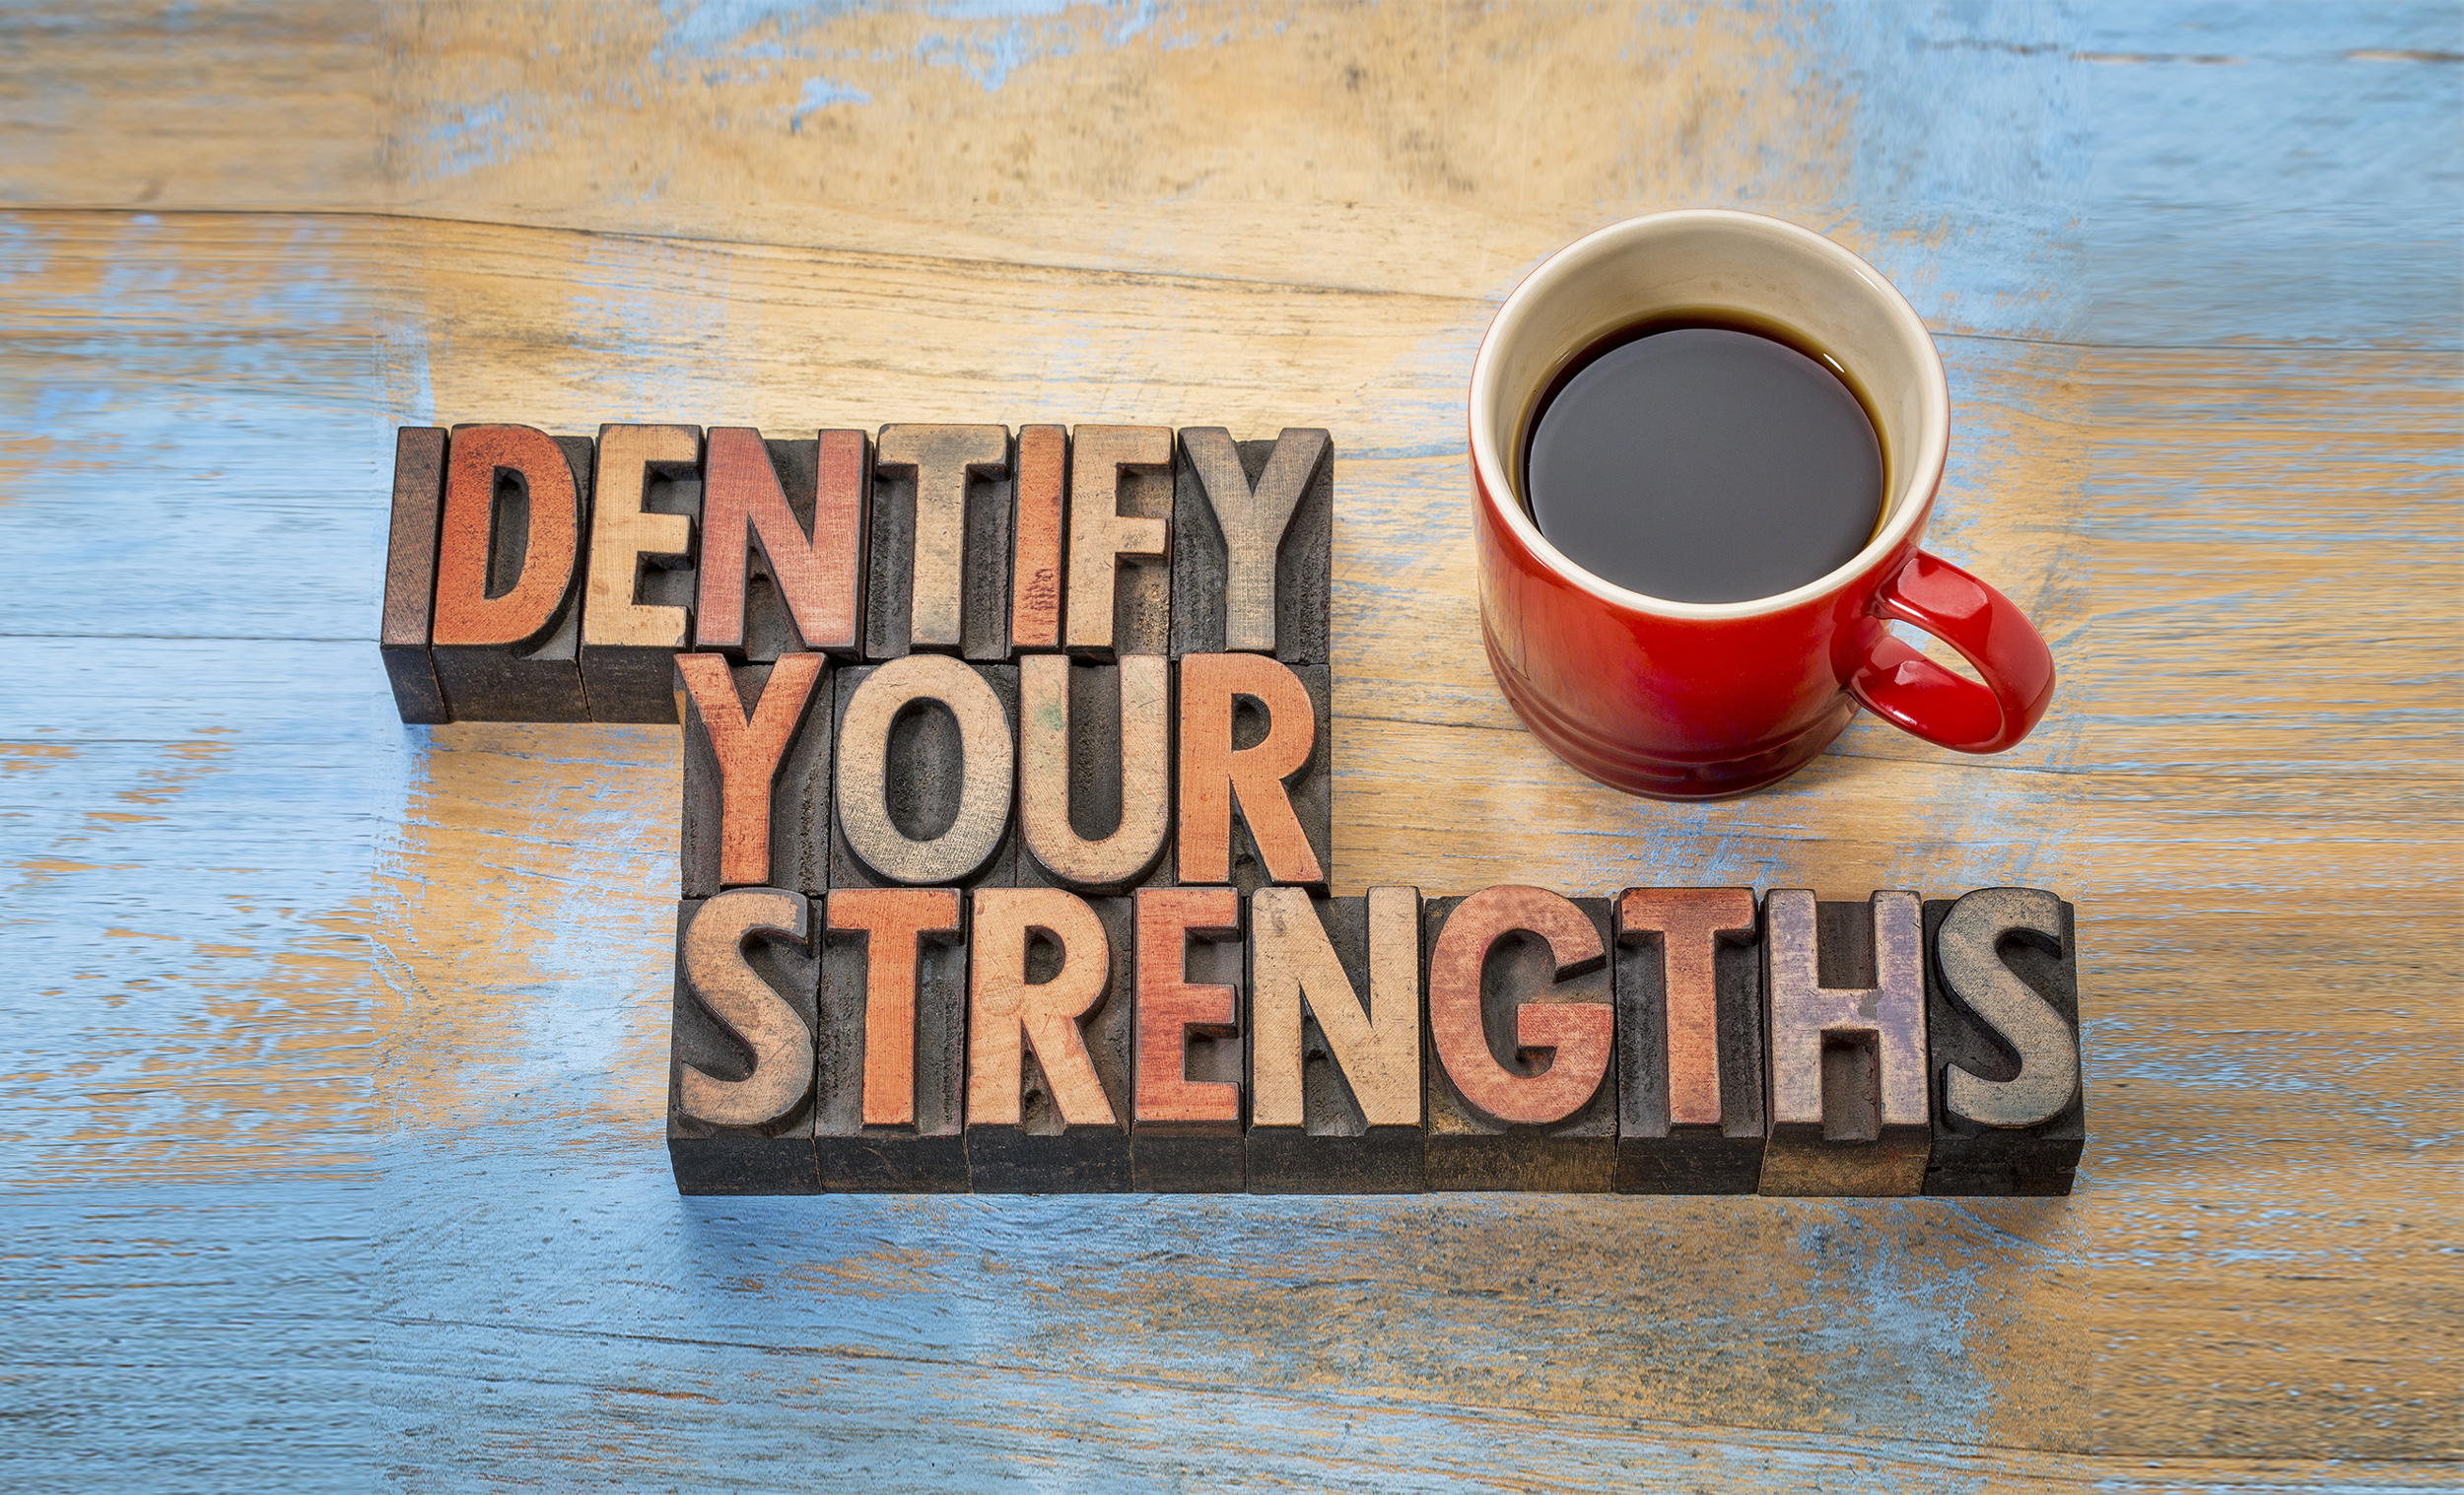 Identify Your Strengths